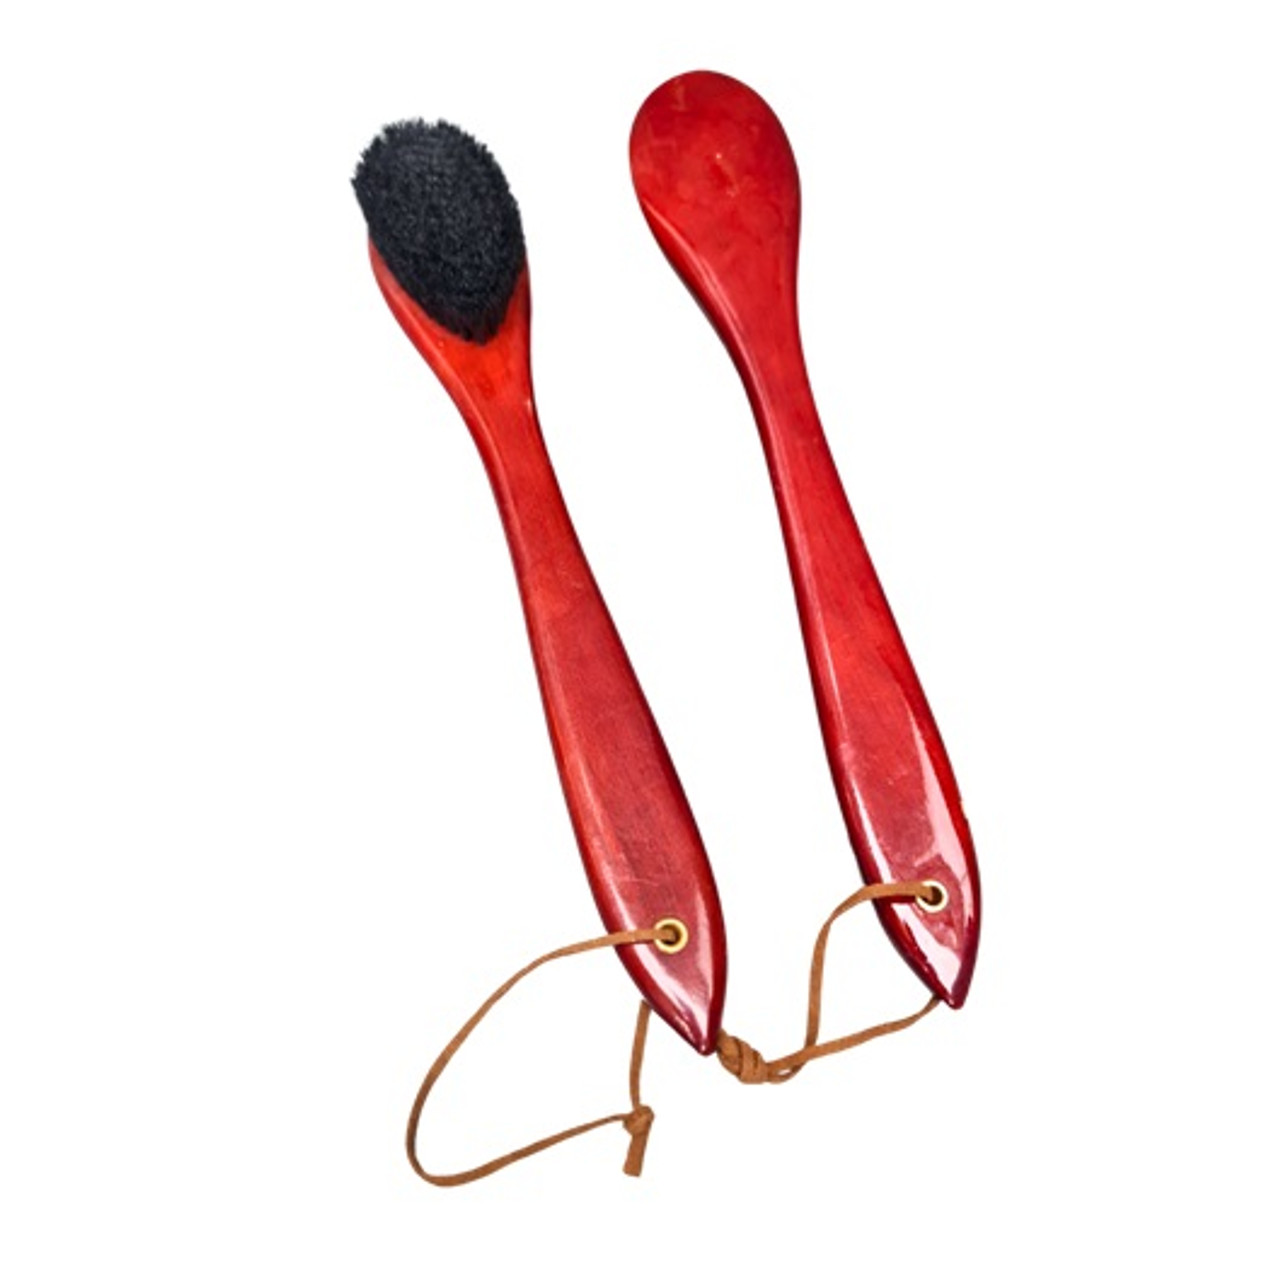 High Quality Wooden Clothes Brush, 380mm Long handle each